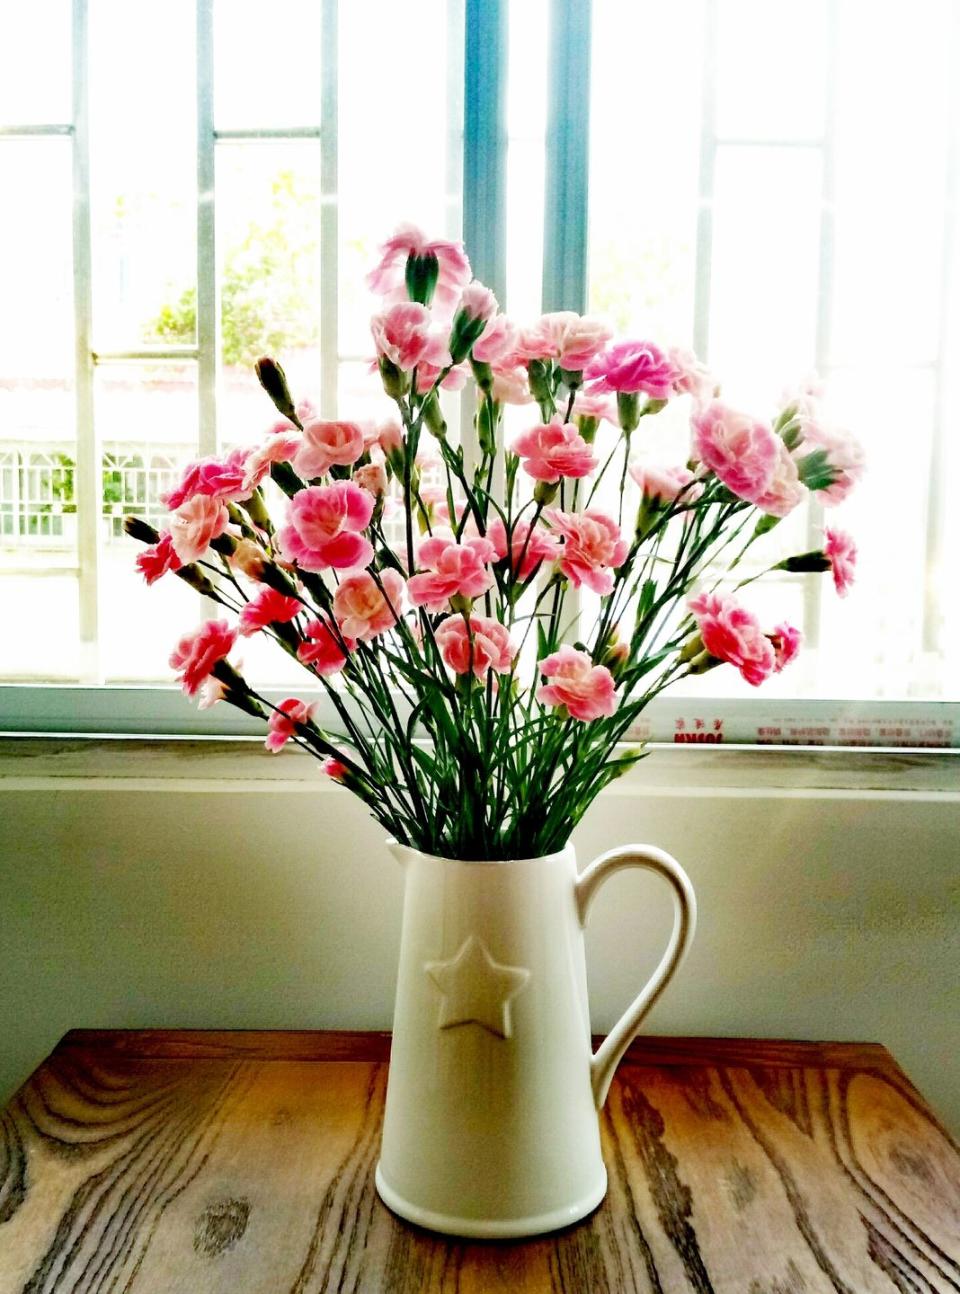 flower vase on table at home